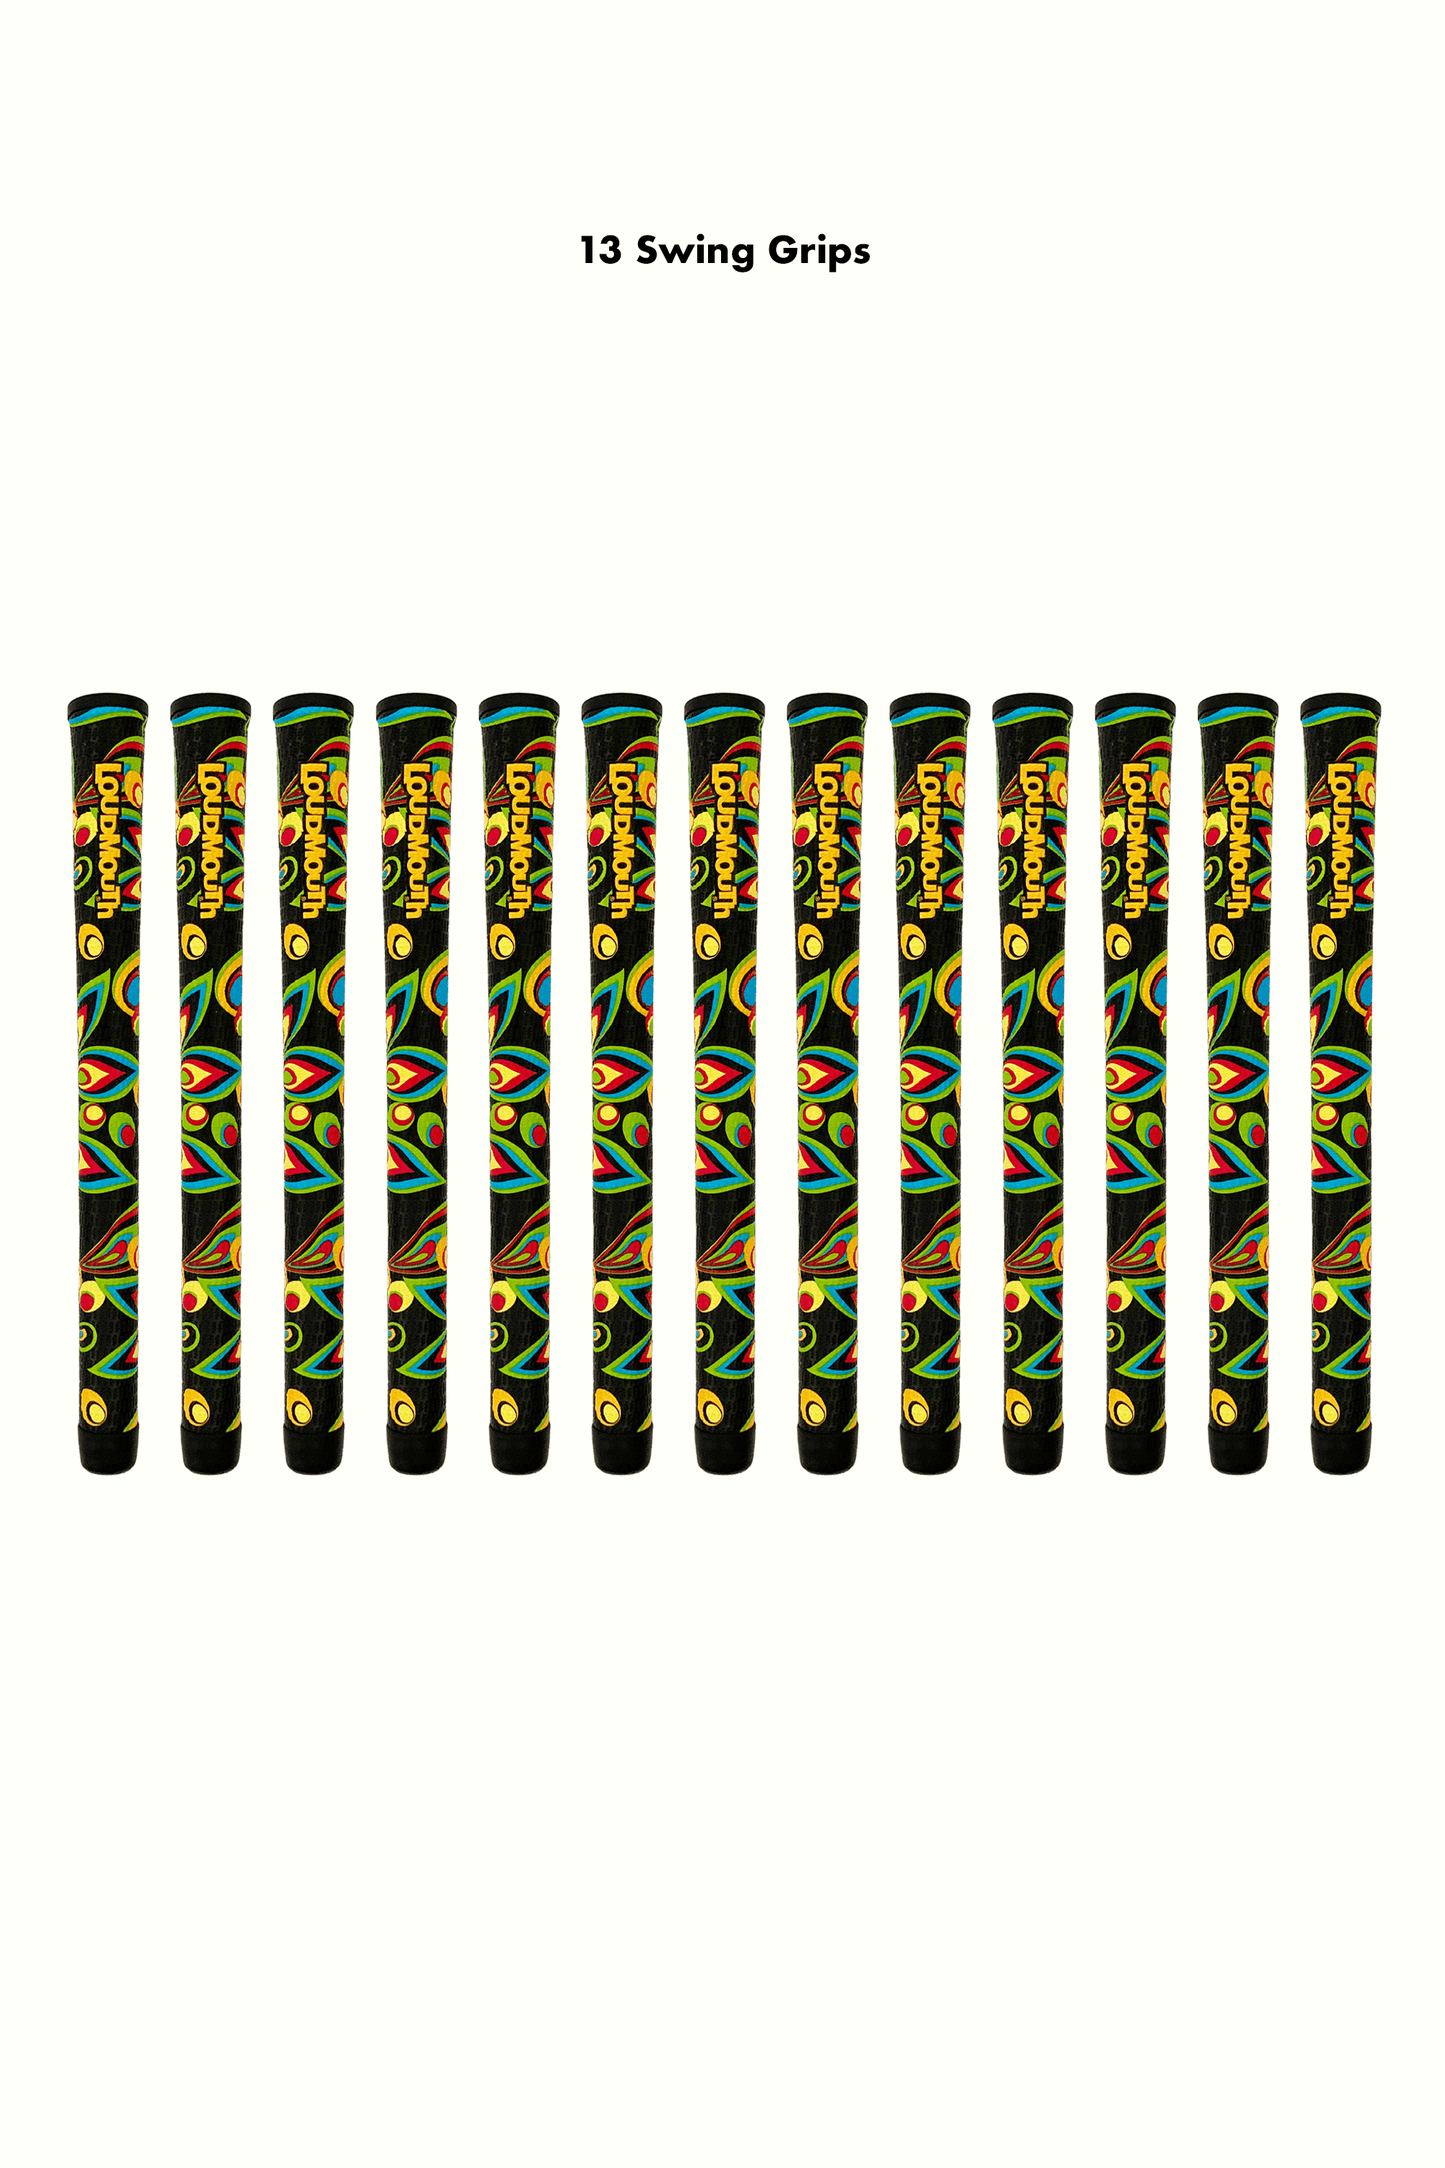 Thirteen swing grips with the Loudmouth logo and shagadelic print